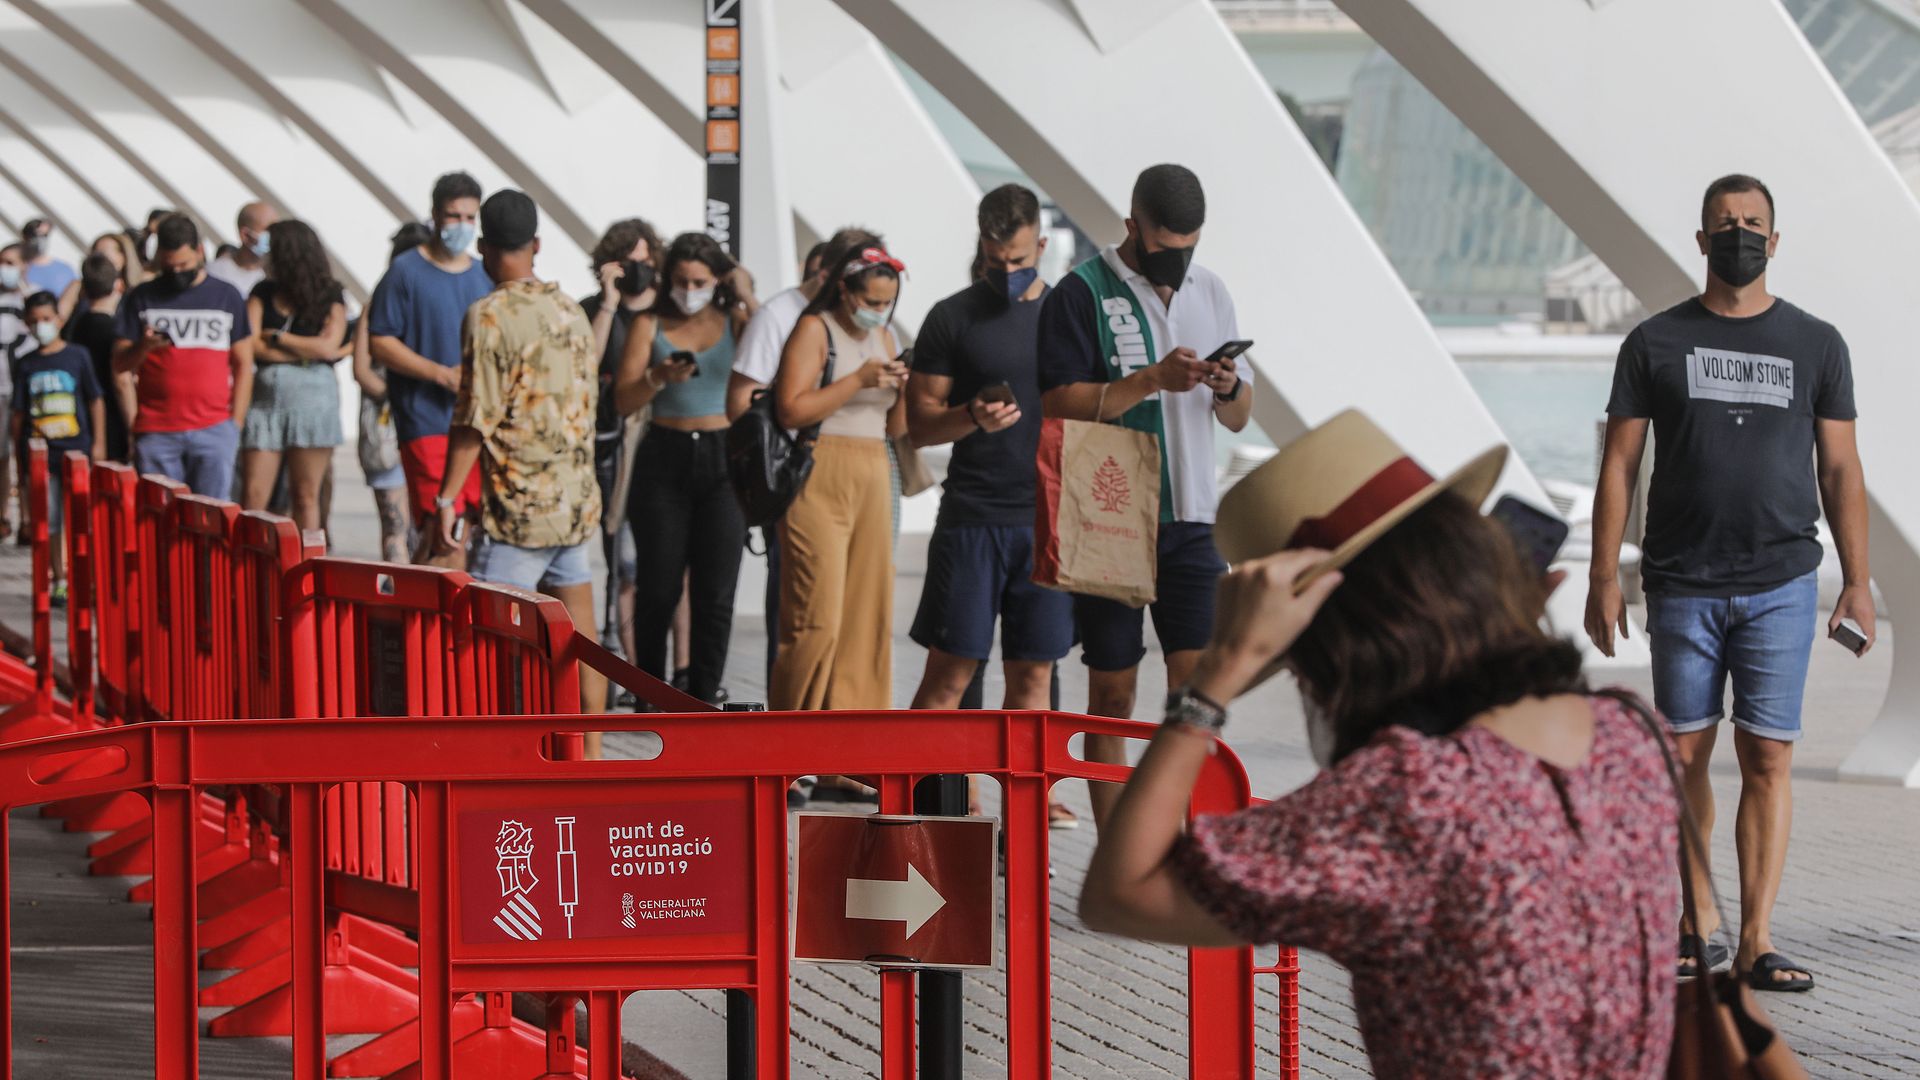 A line of people wait to receive the vaccine against Covid-19 in the vaccination centre launched in the Ciutat de les Arts i les Ciències de Valencia, on 28 July, 2021